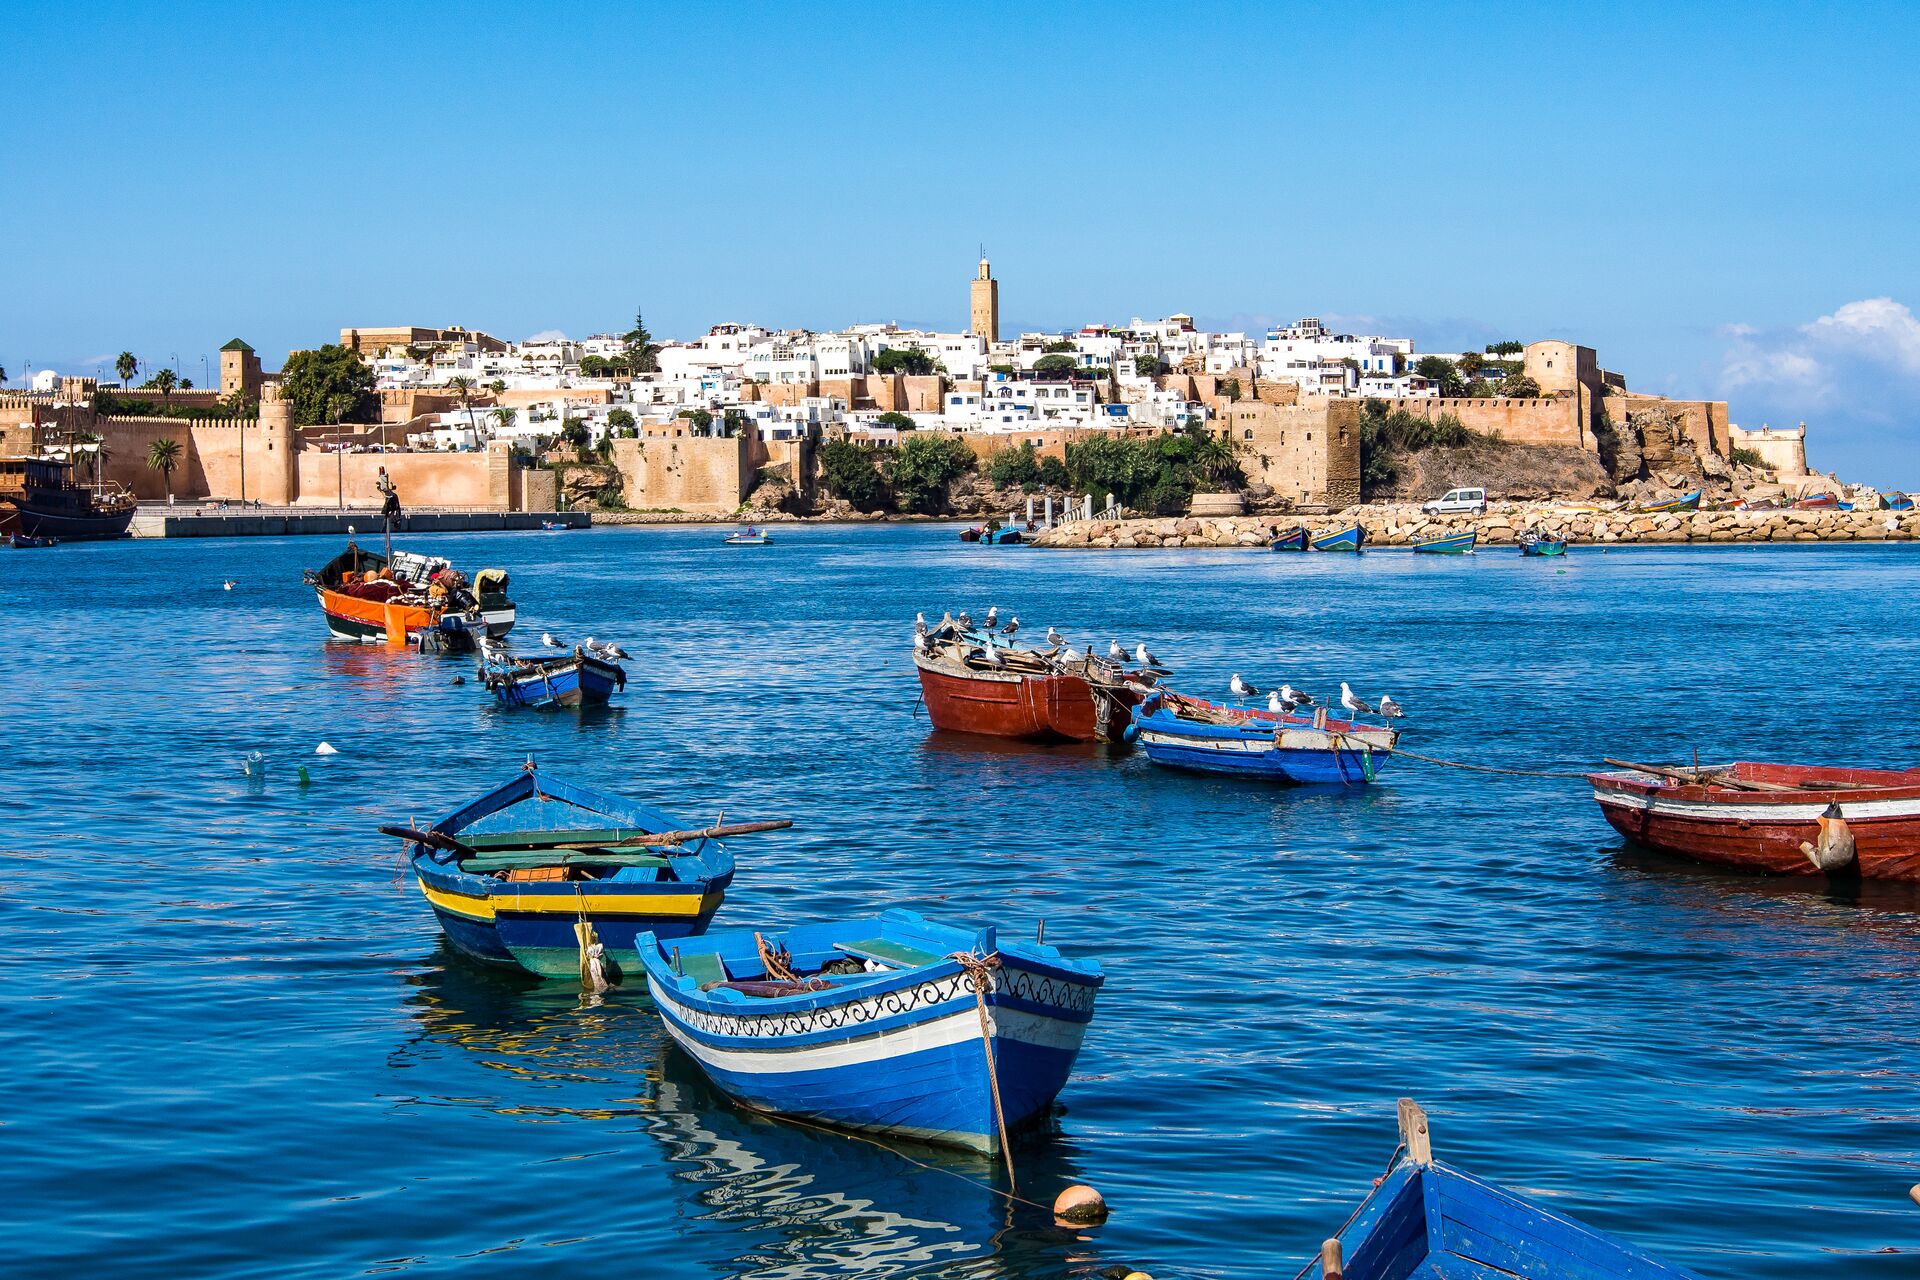 The town of rabat is shown with the sea in front dotted with colourful small boats